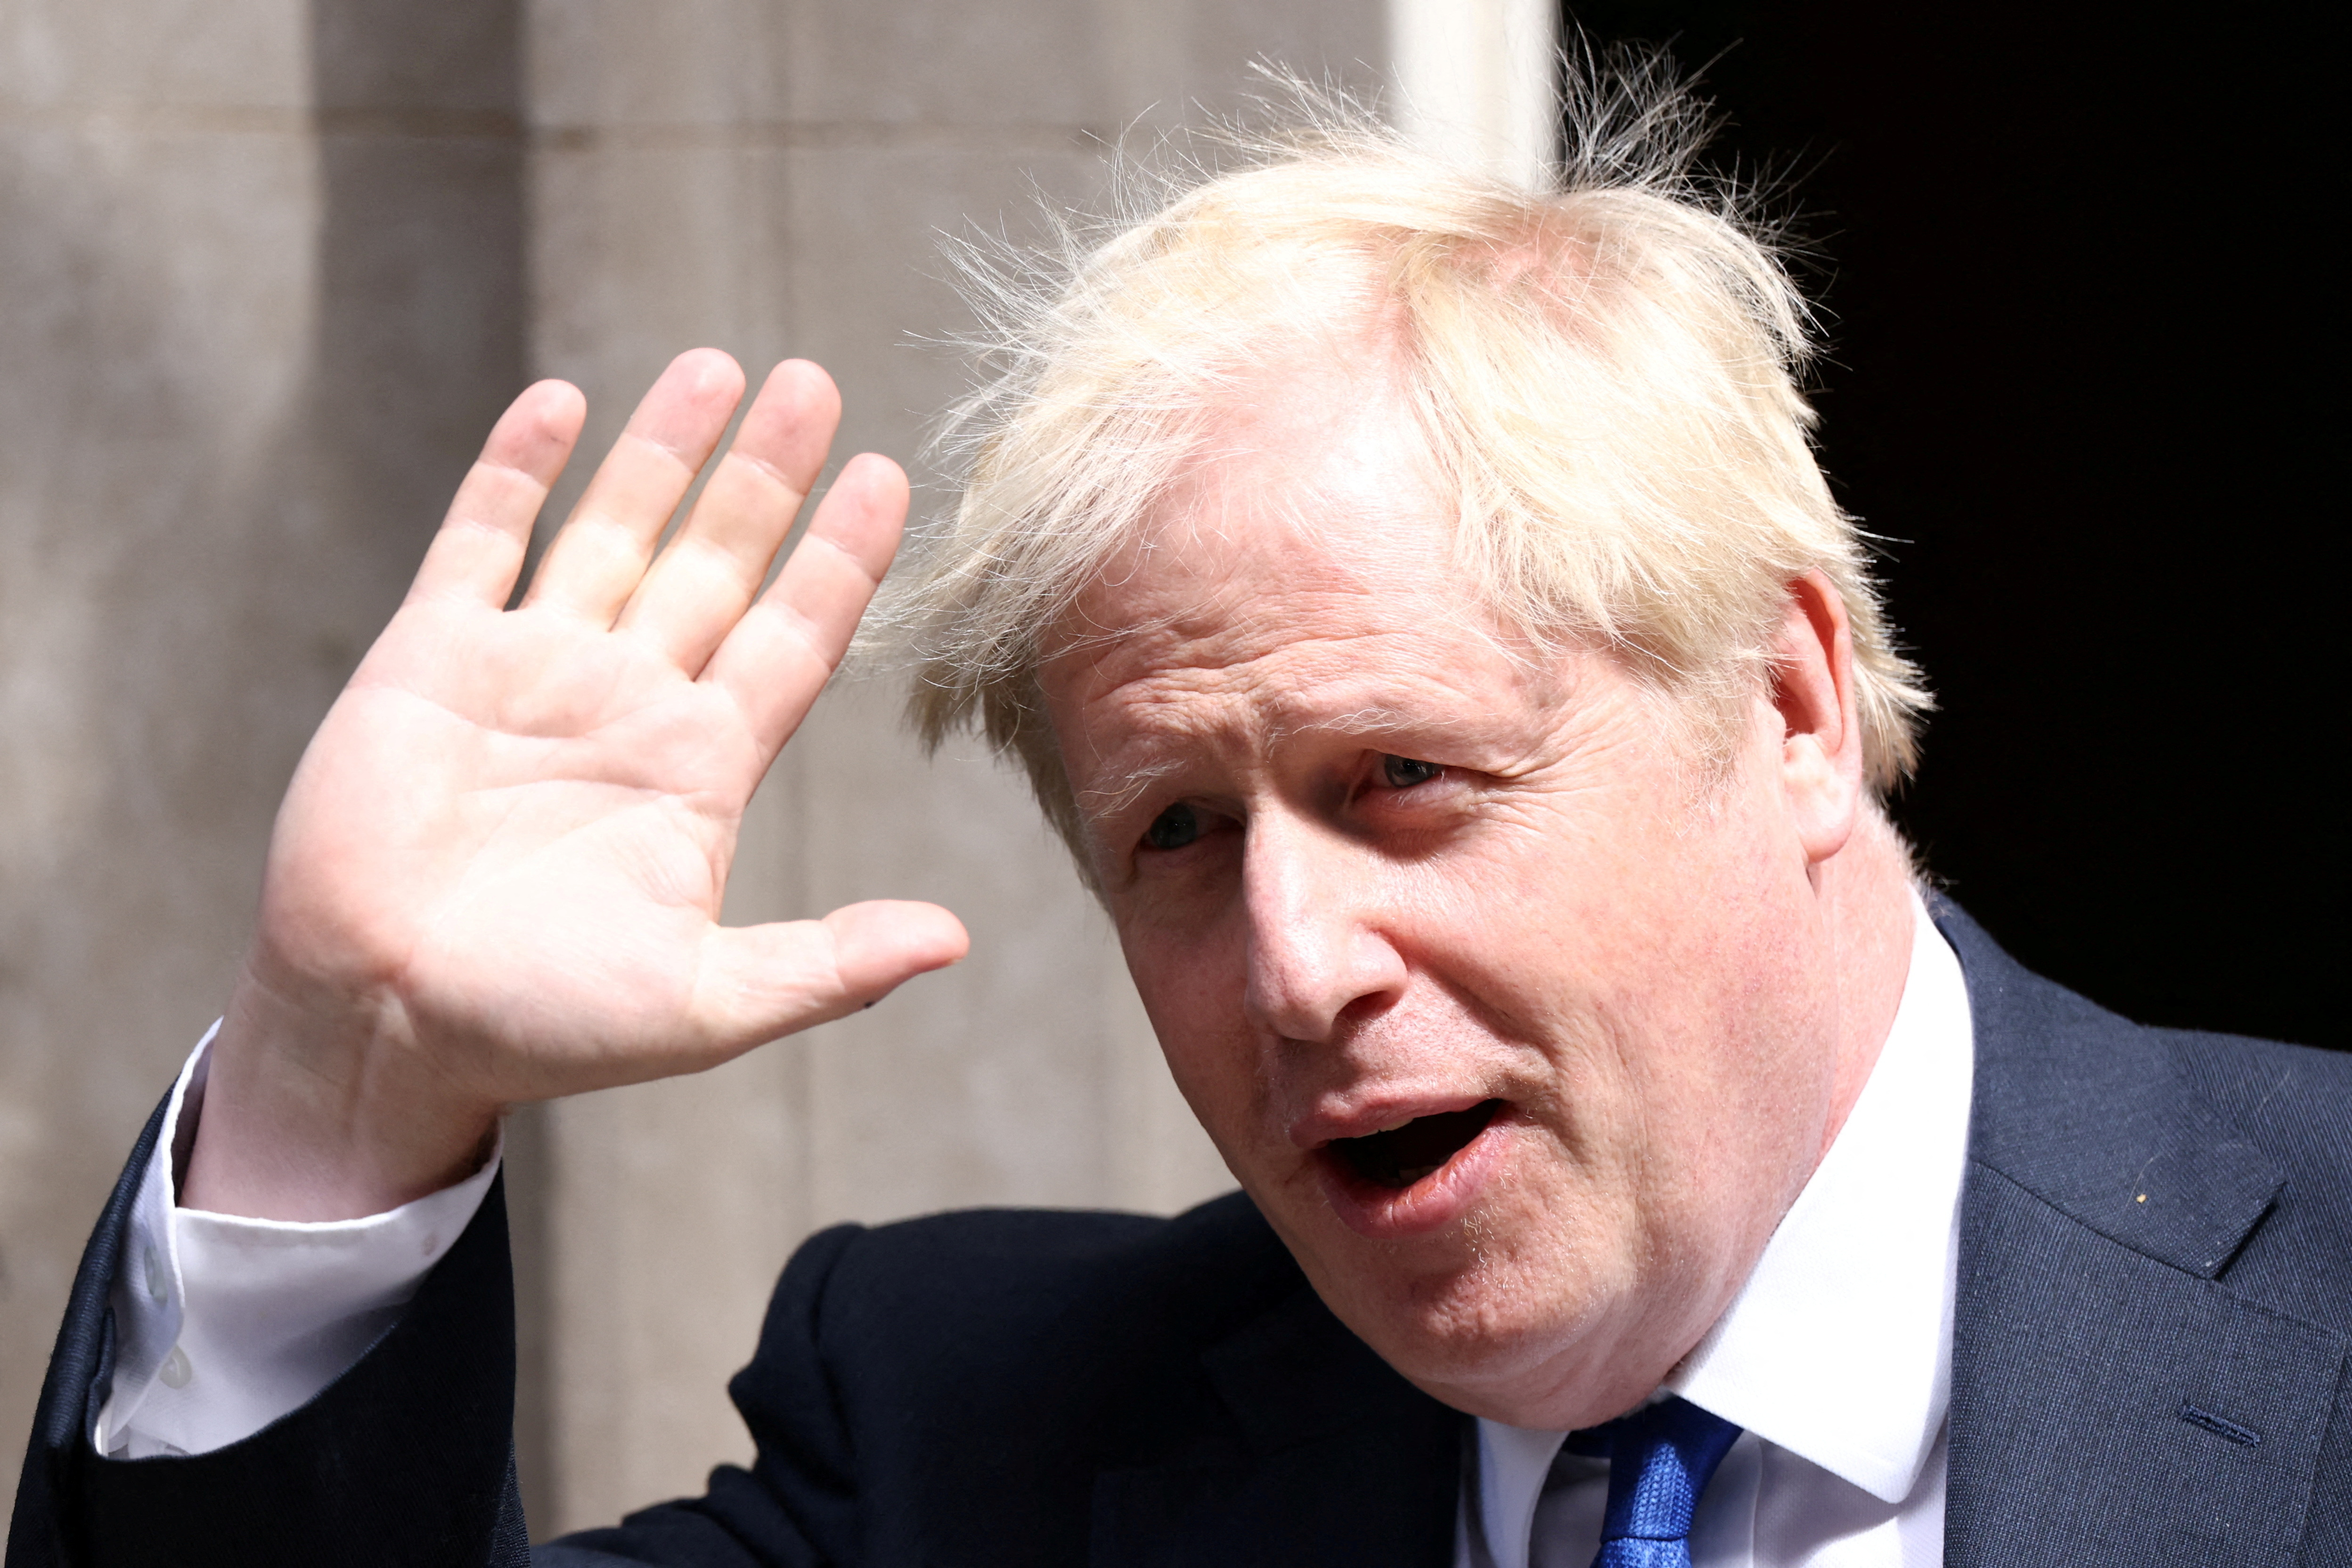 ‘Absolutely defiant’ Boris Johnson will fight to stay as UK PM amid cabinet revolt